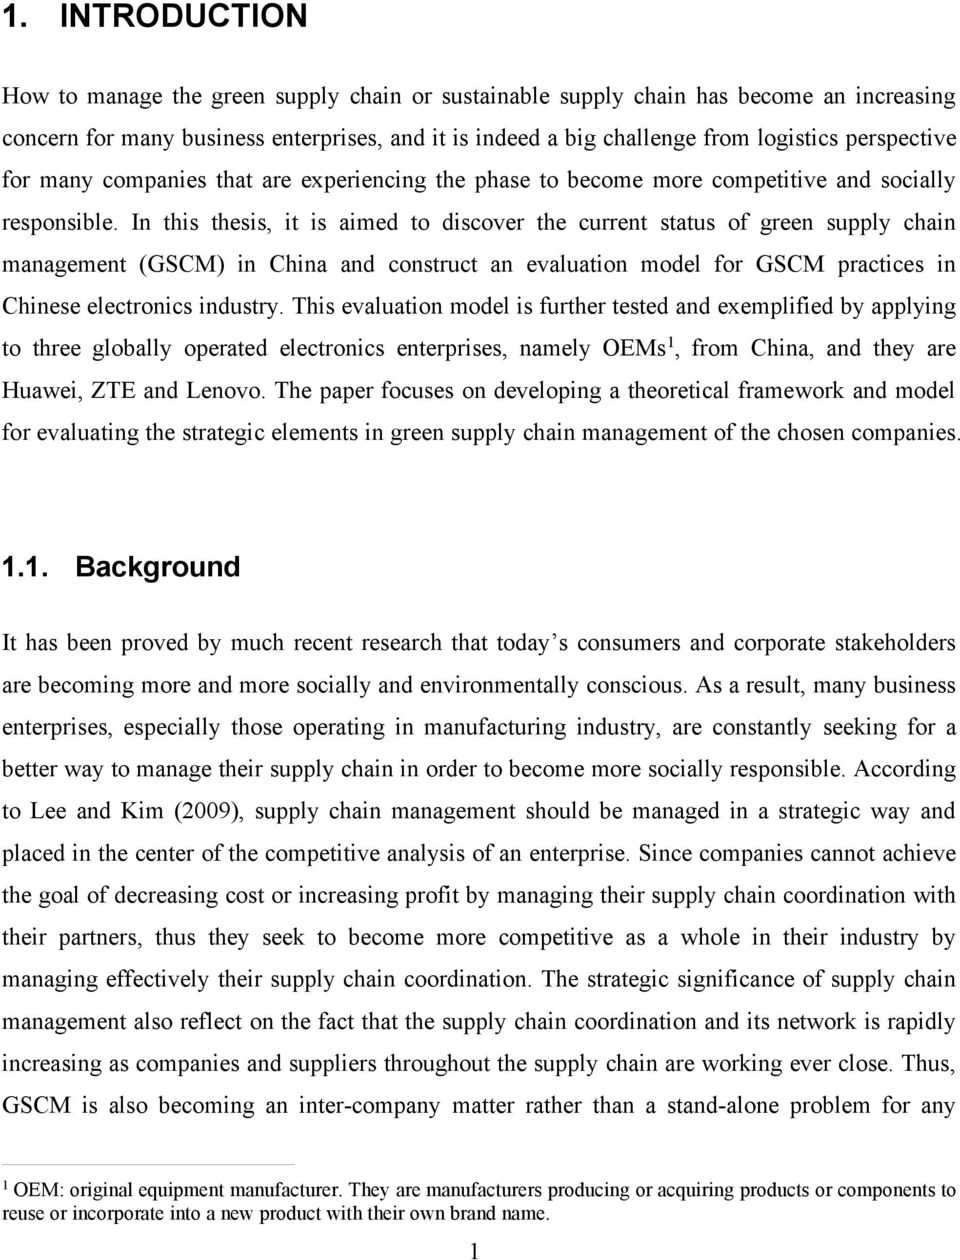 In this thesis, it is aimed to discover the current status of green supply chain management (GSCM) in China and construct an evaluation model for GSCM practices in Chinese electronics industry.